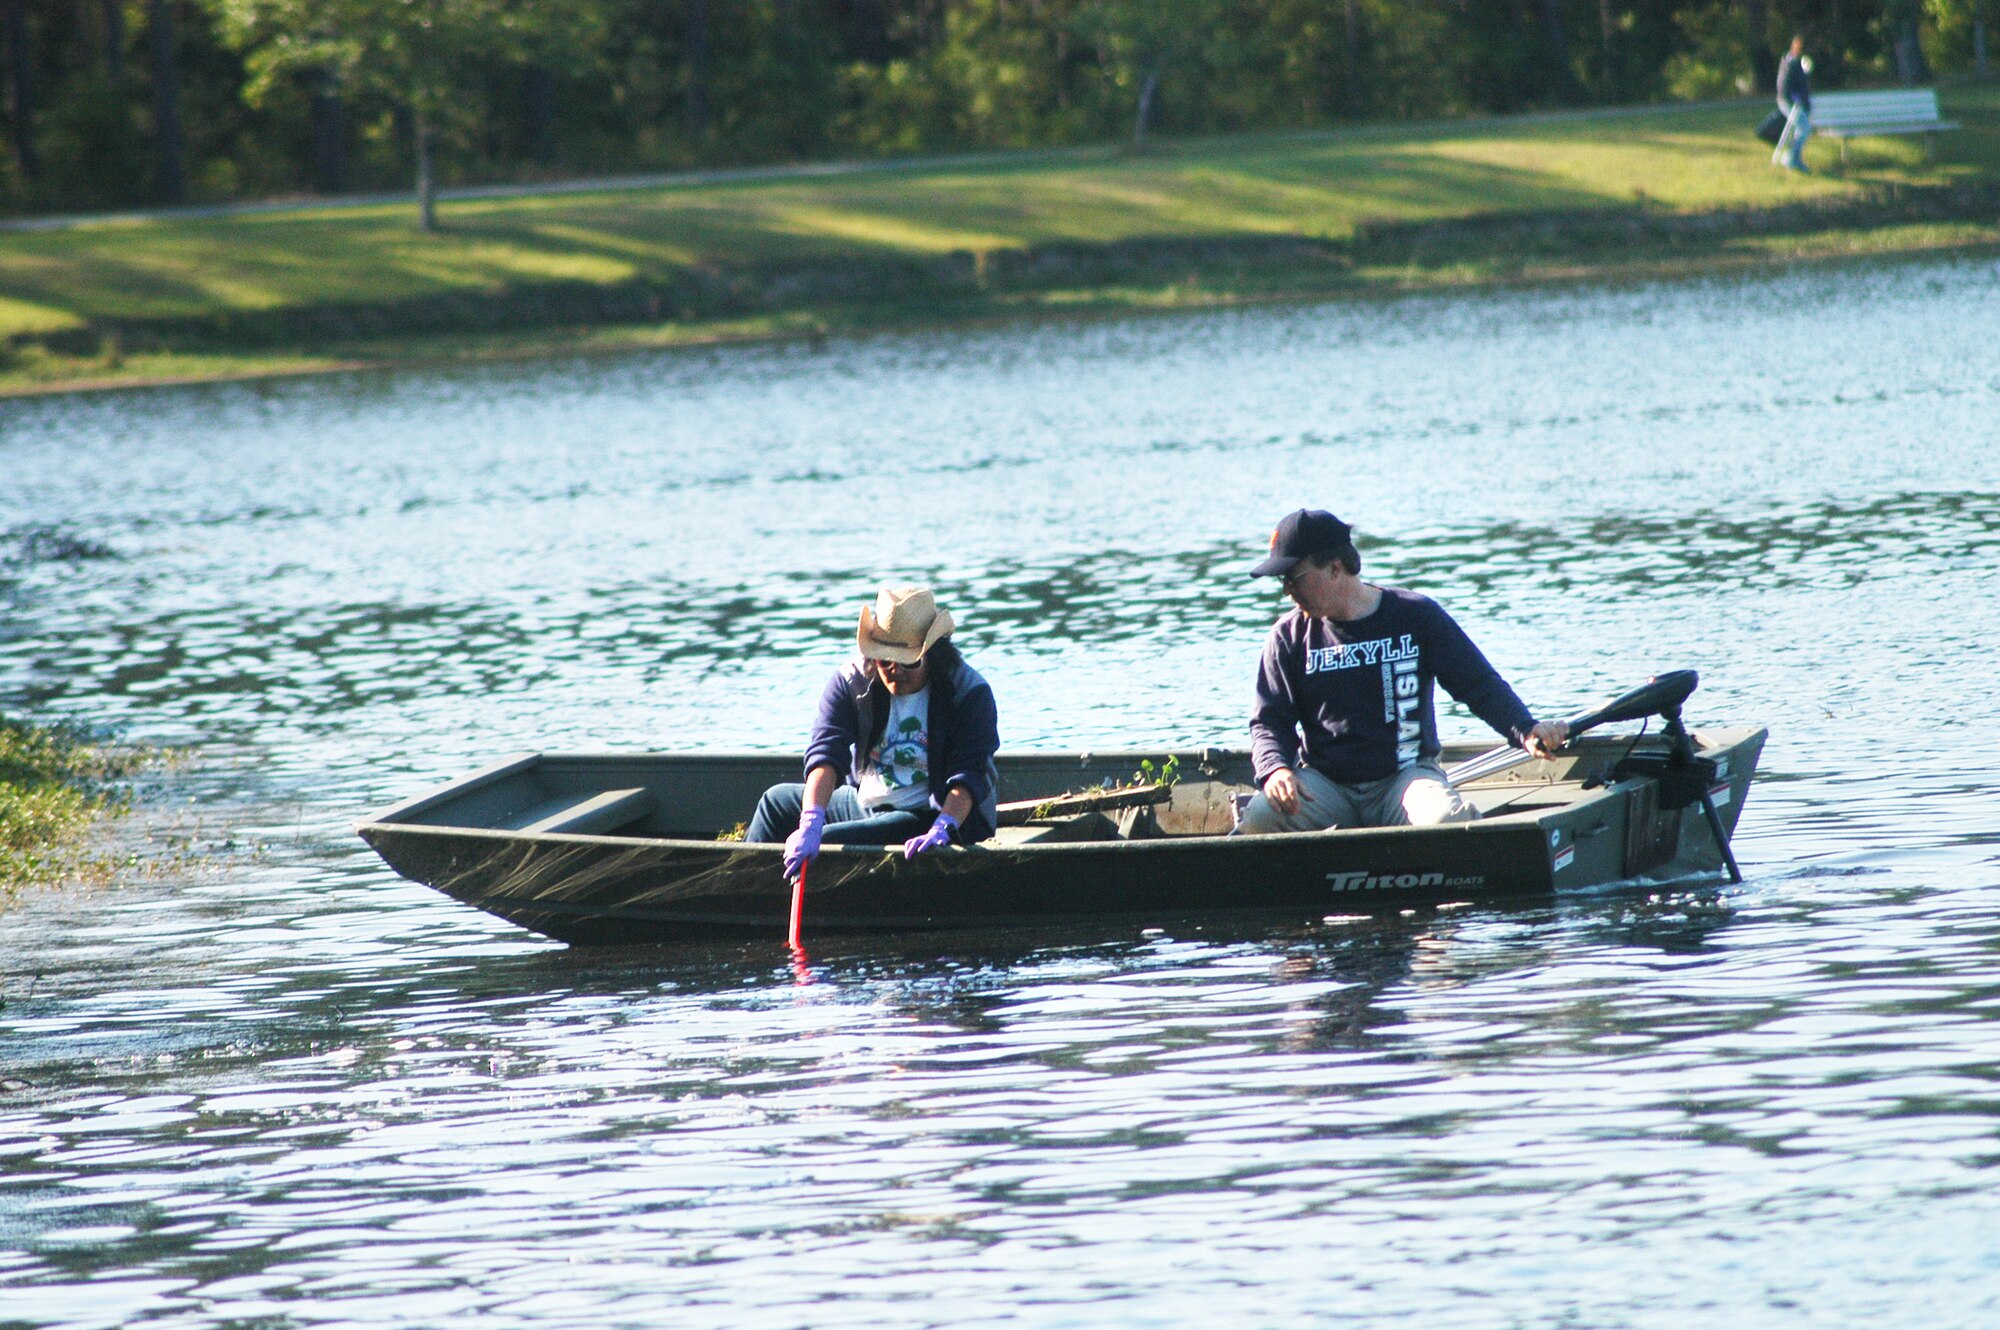 Esther Lee-Altman and Bob Sargent, 78th Civil Engineer Group, use a boat to collect debris from Scout Lake Wednesday. The clean-up was part of the Robins Air Force Base Earth Day Celebration events. (U. S. Air Force photo by Sue Sapp)